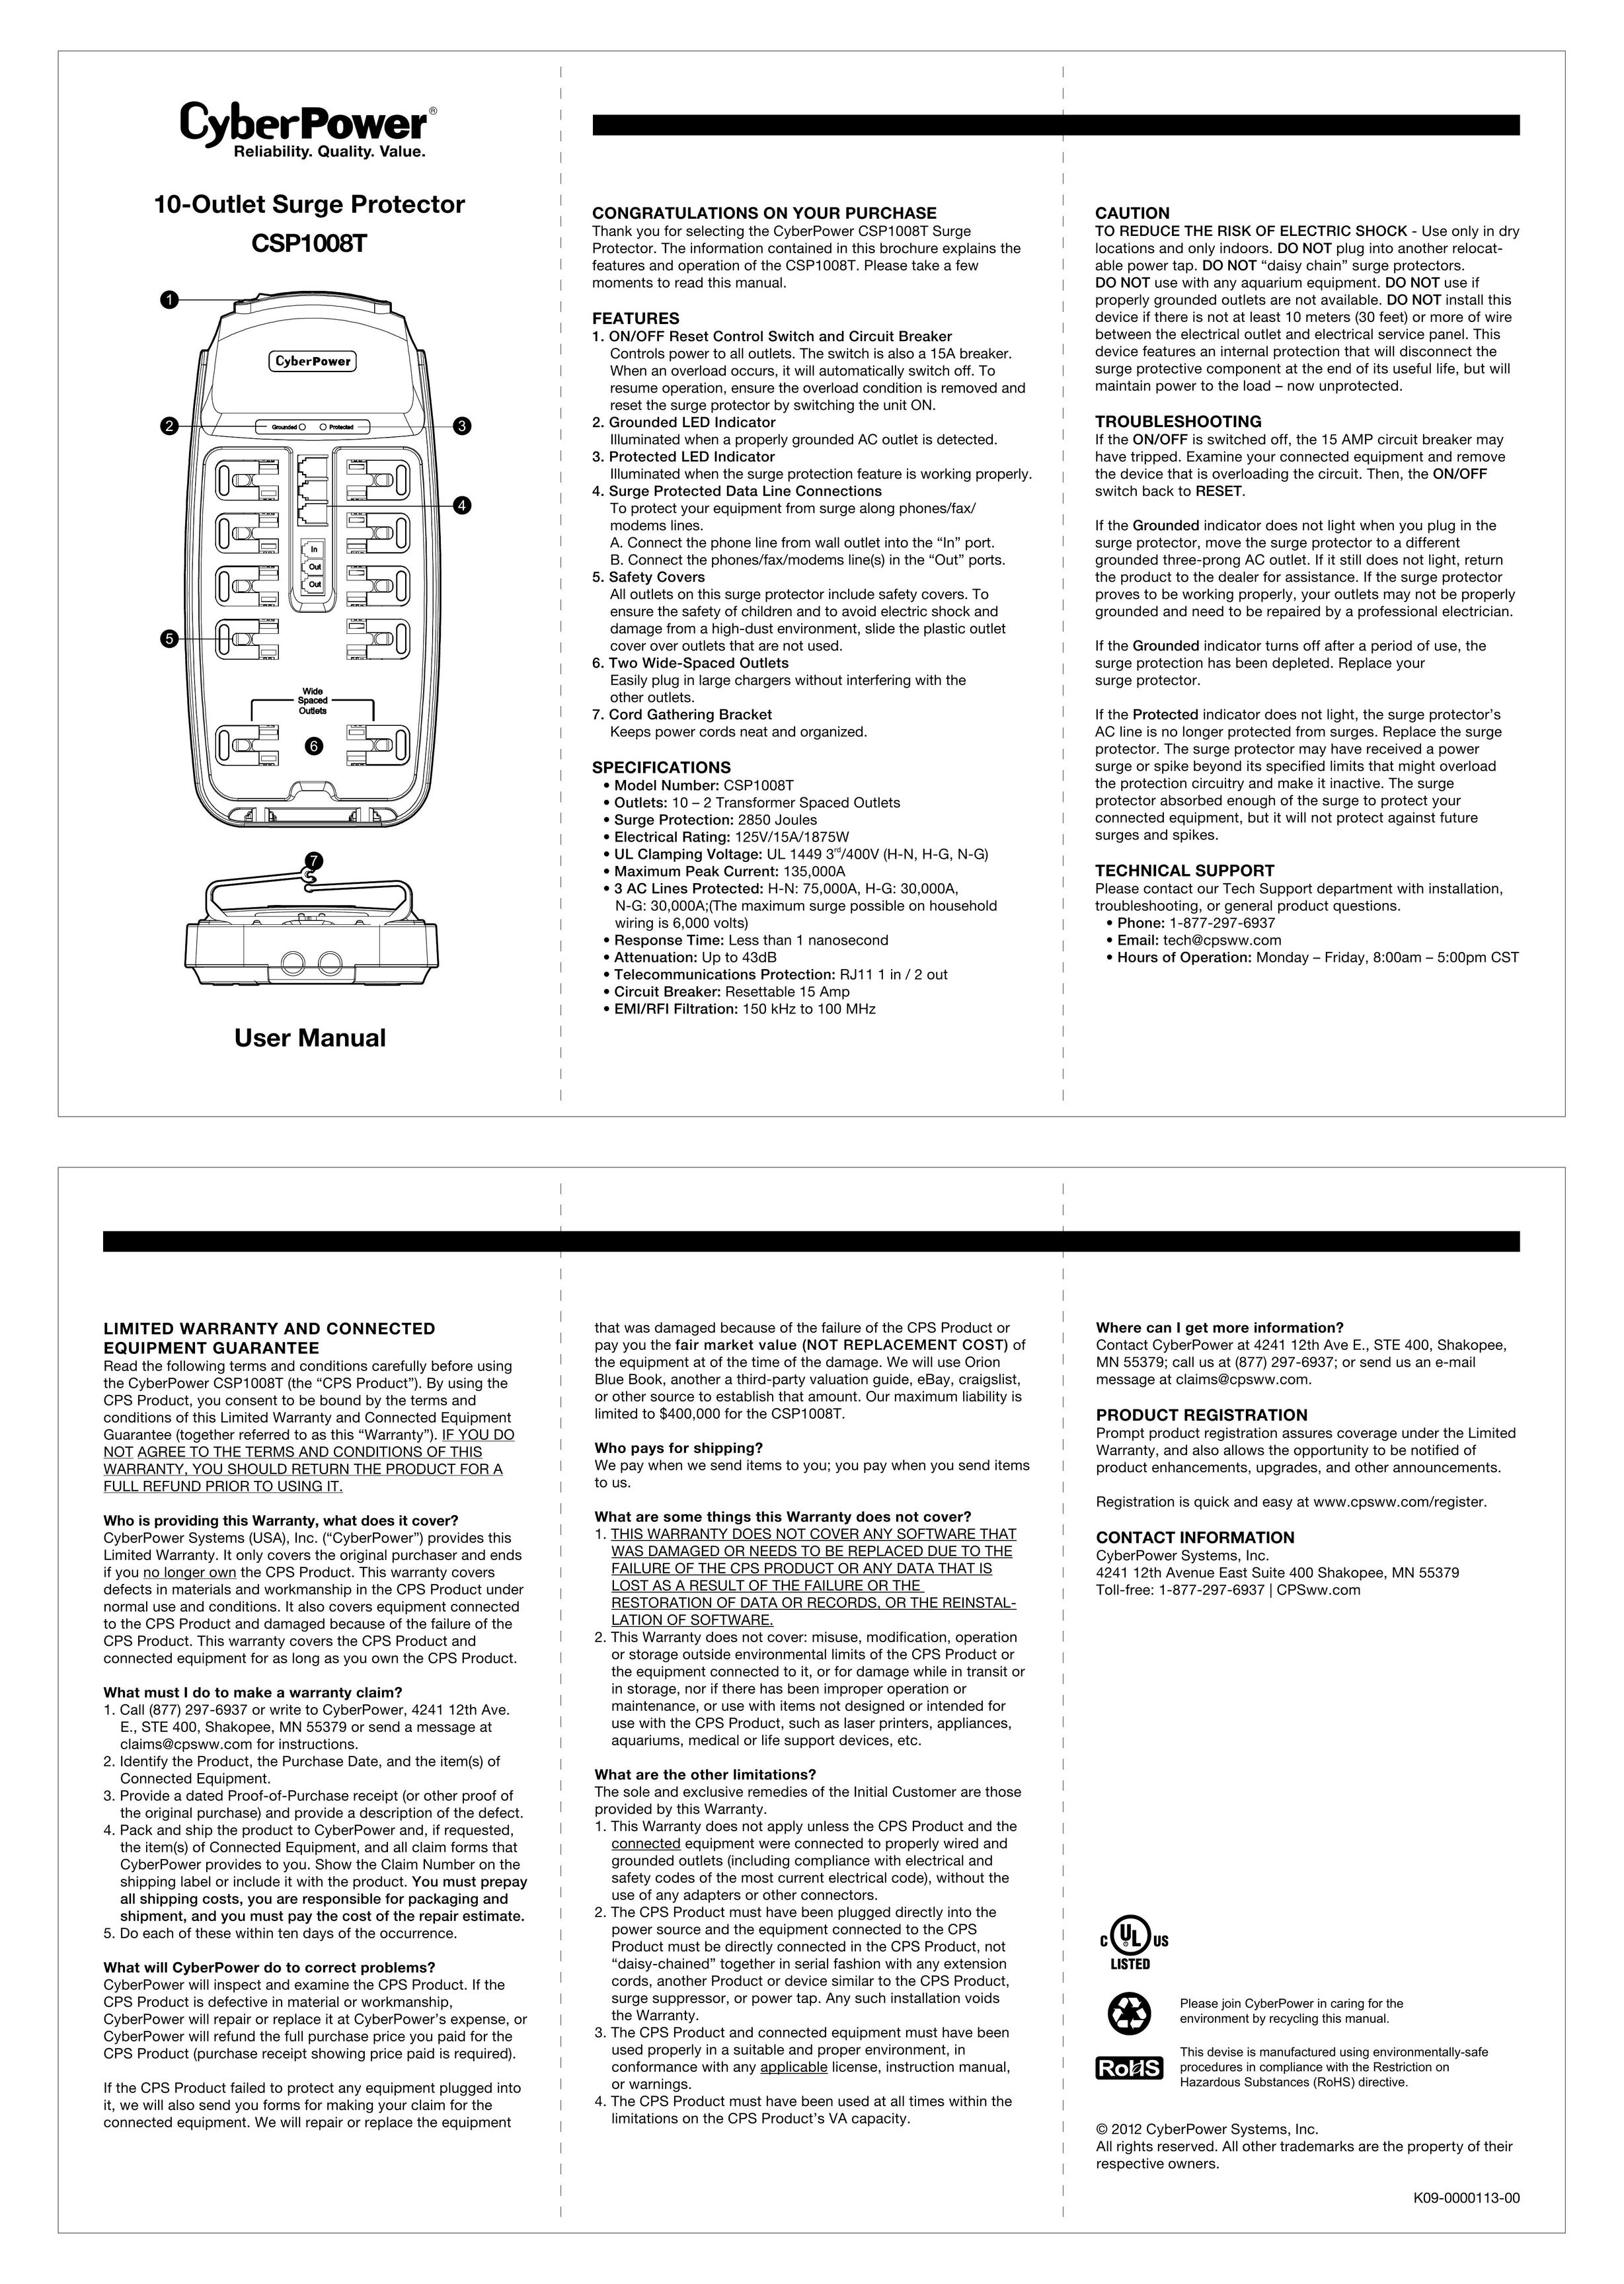 CyberPower CSP1008T Surge Protector User Manual